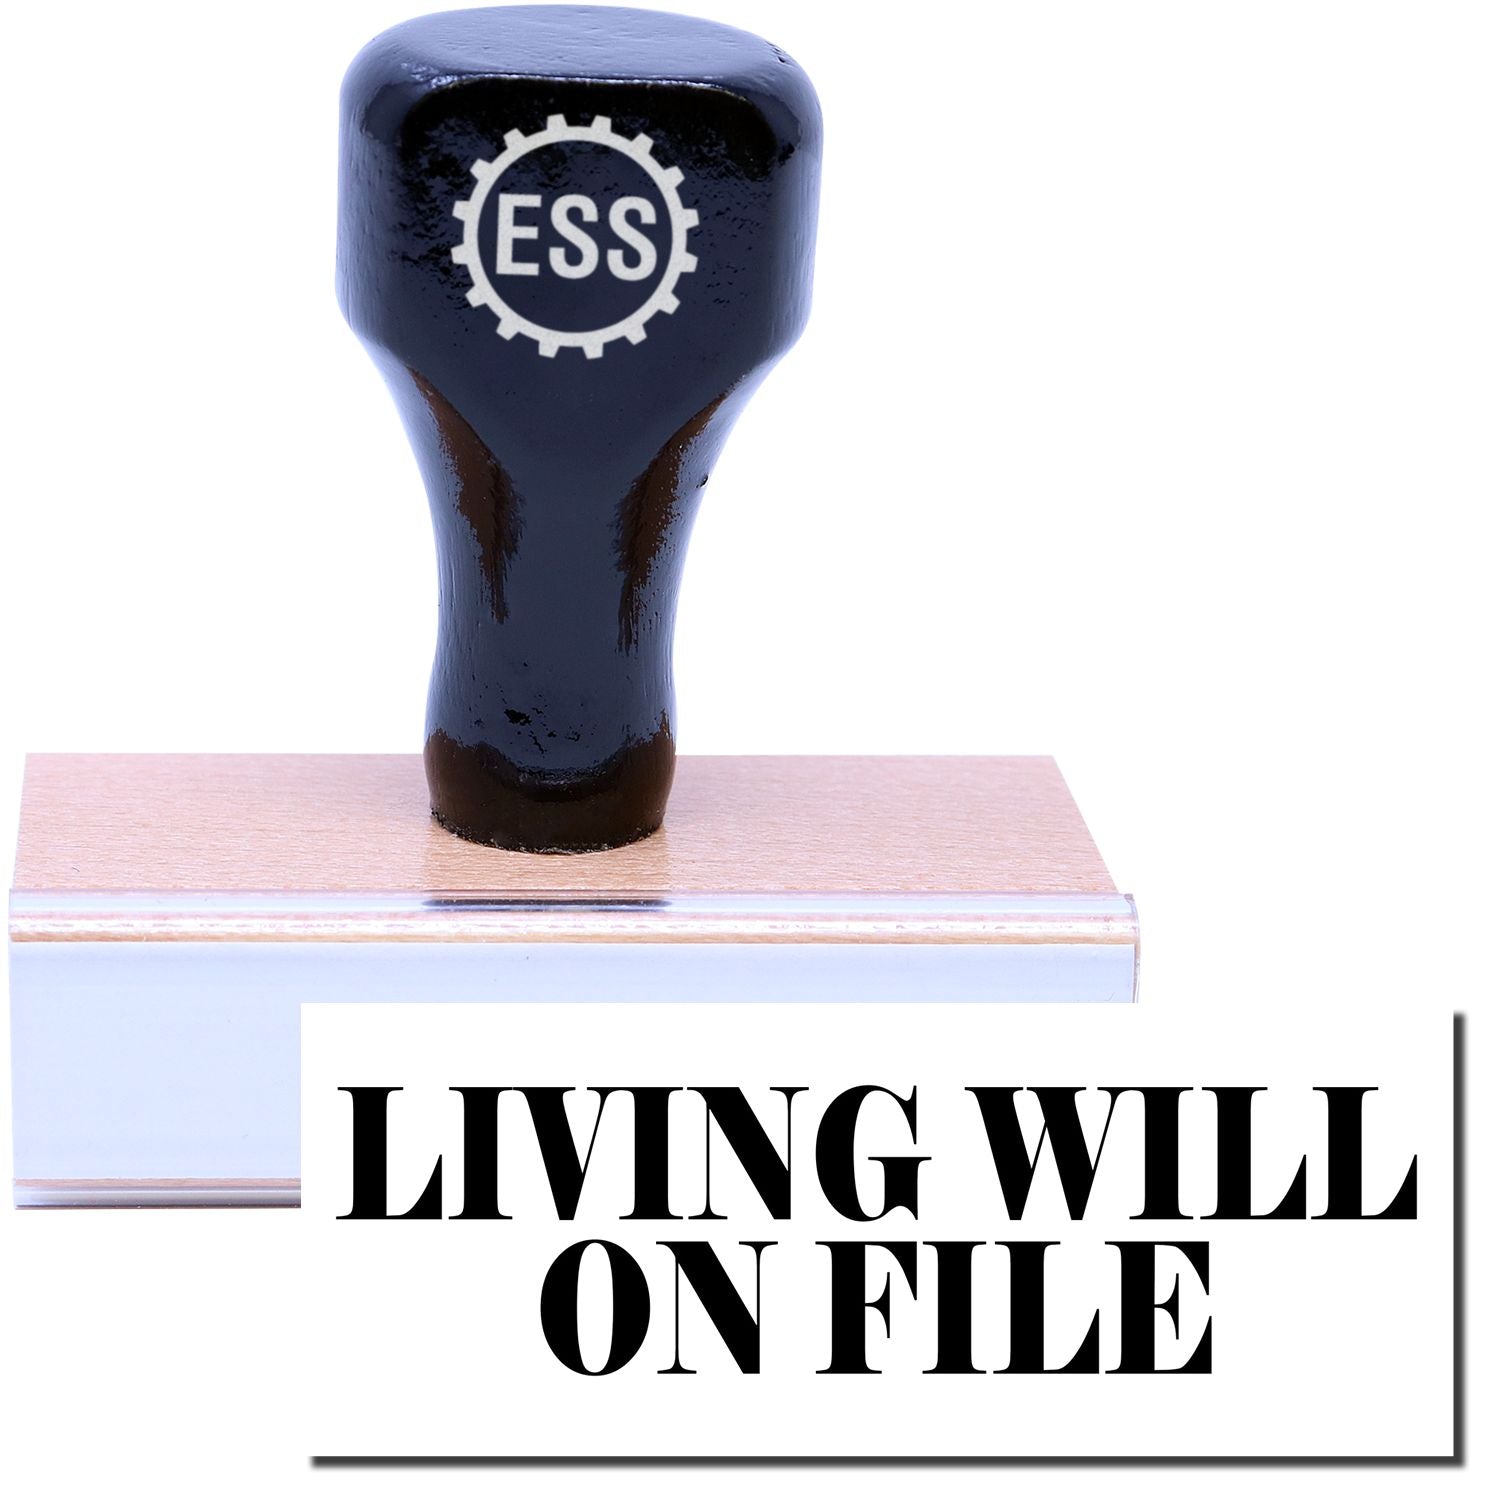 A stock office rubber stamp with a stamped image showing how the text "LIVING WILL ON FILE" is displayed after stamping.